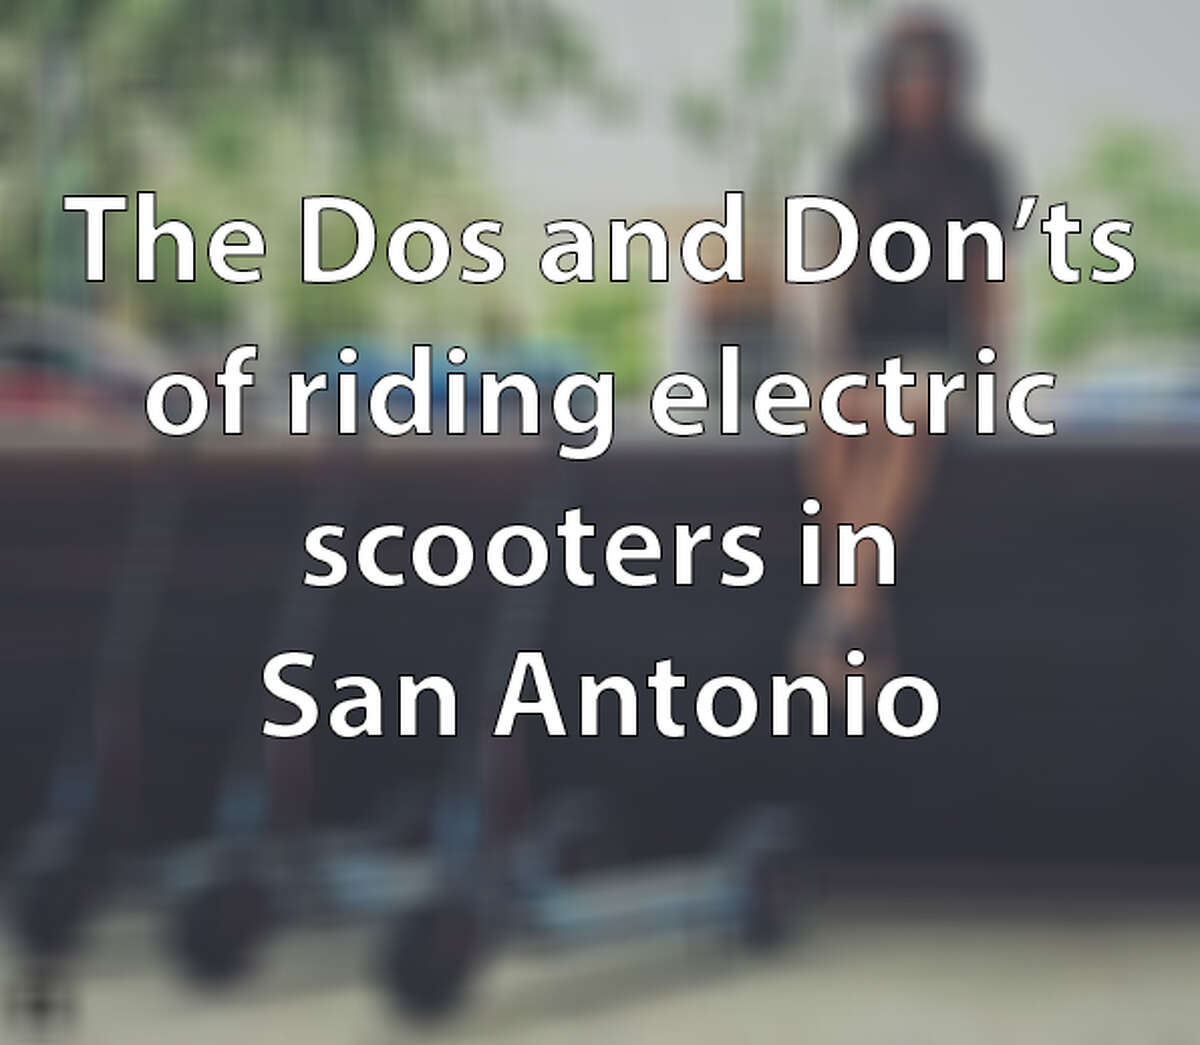 If the San Antonio City Council passes a proposed set of regulations, there will be a number of rules to follow when riding and parking electric scooters in the city. Click through to see the dos and don'ts that will come into law if the regulations are passed in October.